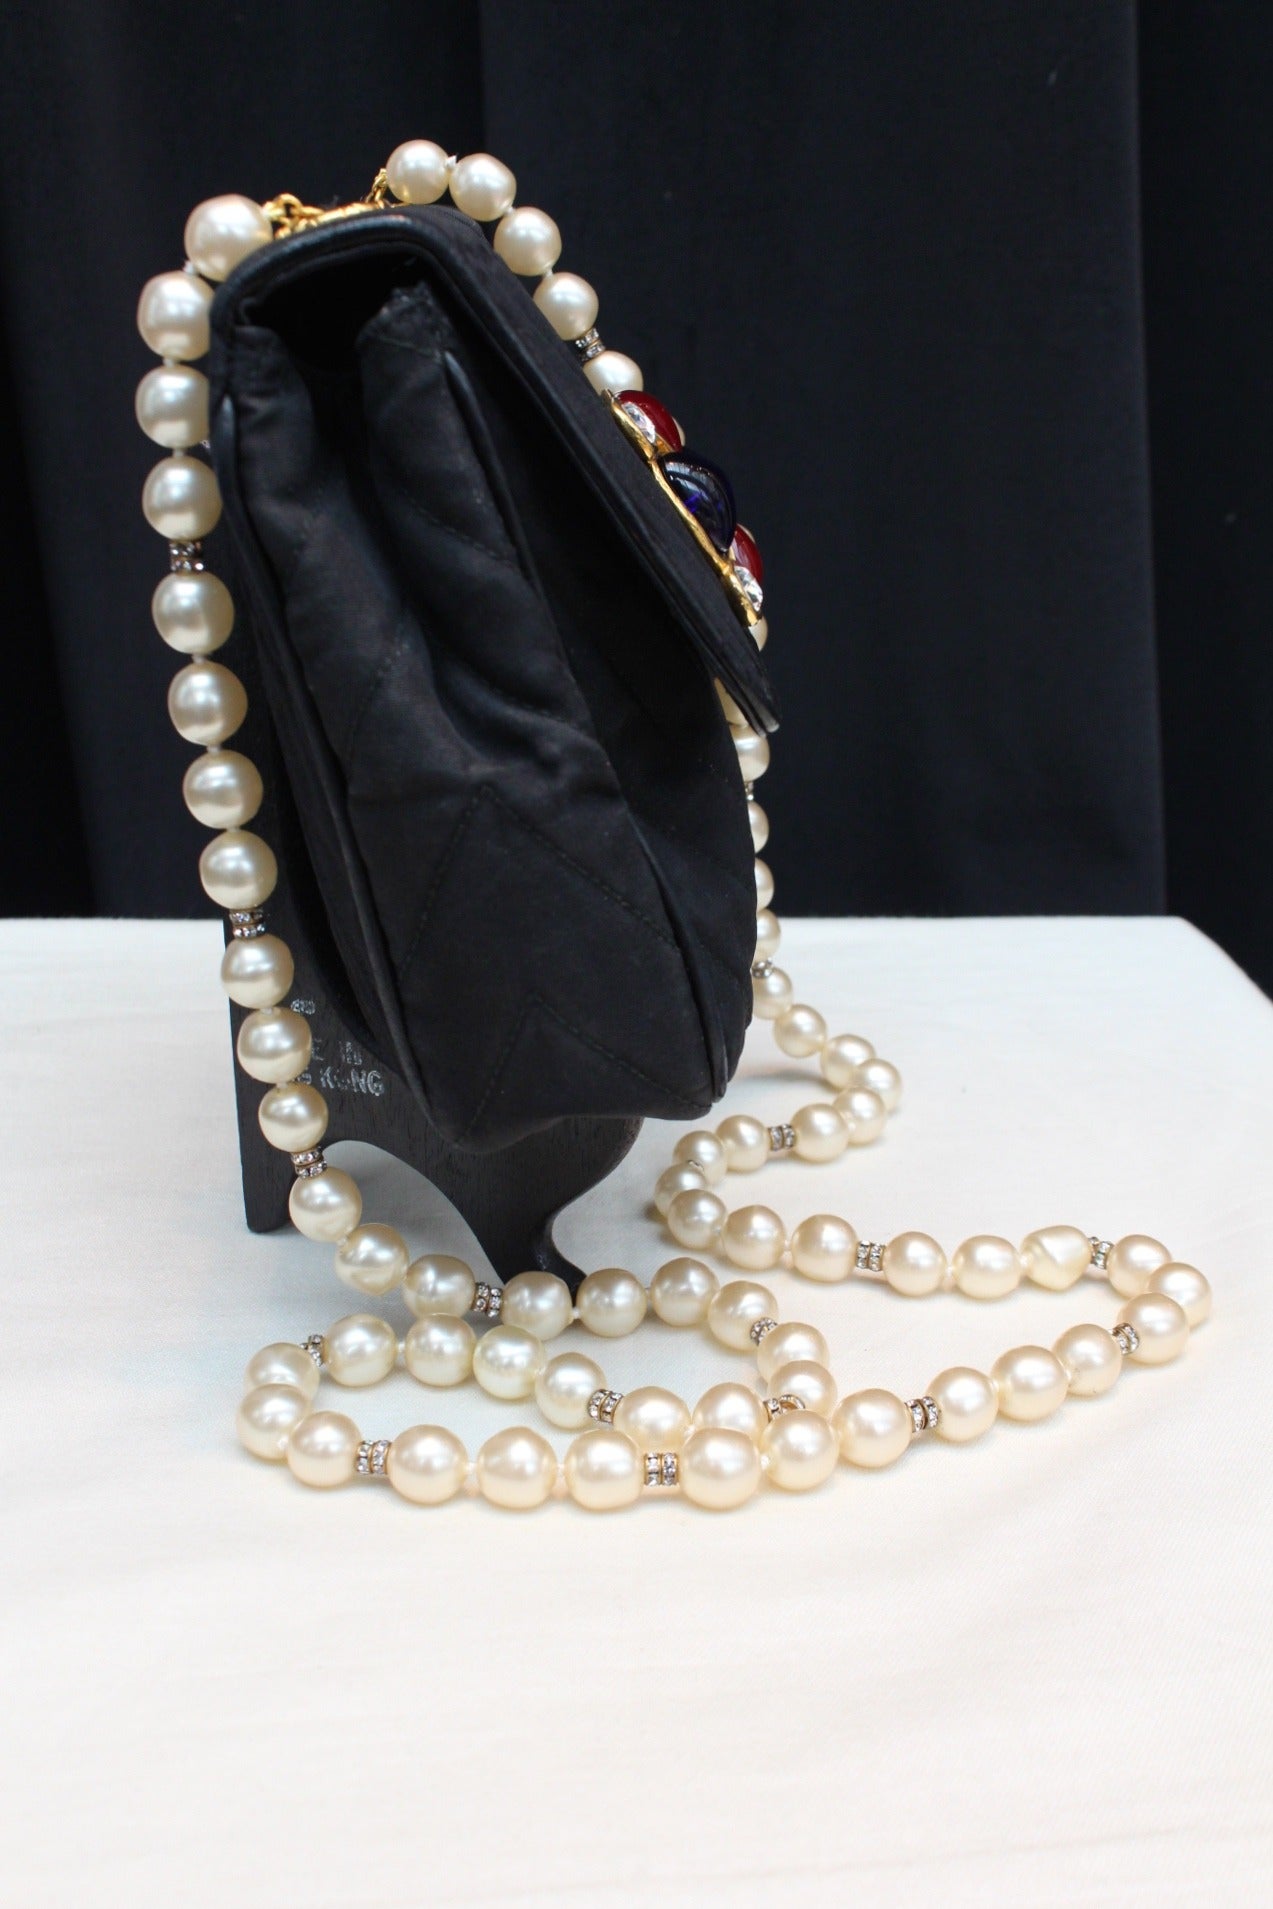 Black 1990s Chanel, Gabardine, Glass Paste and Faux Pearls Evening Bag  by Woloch